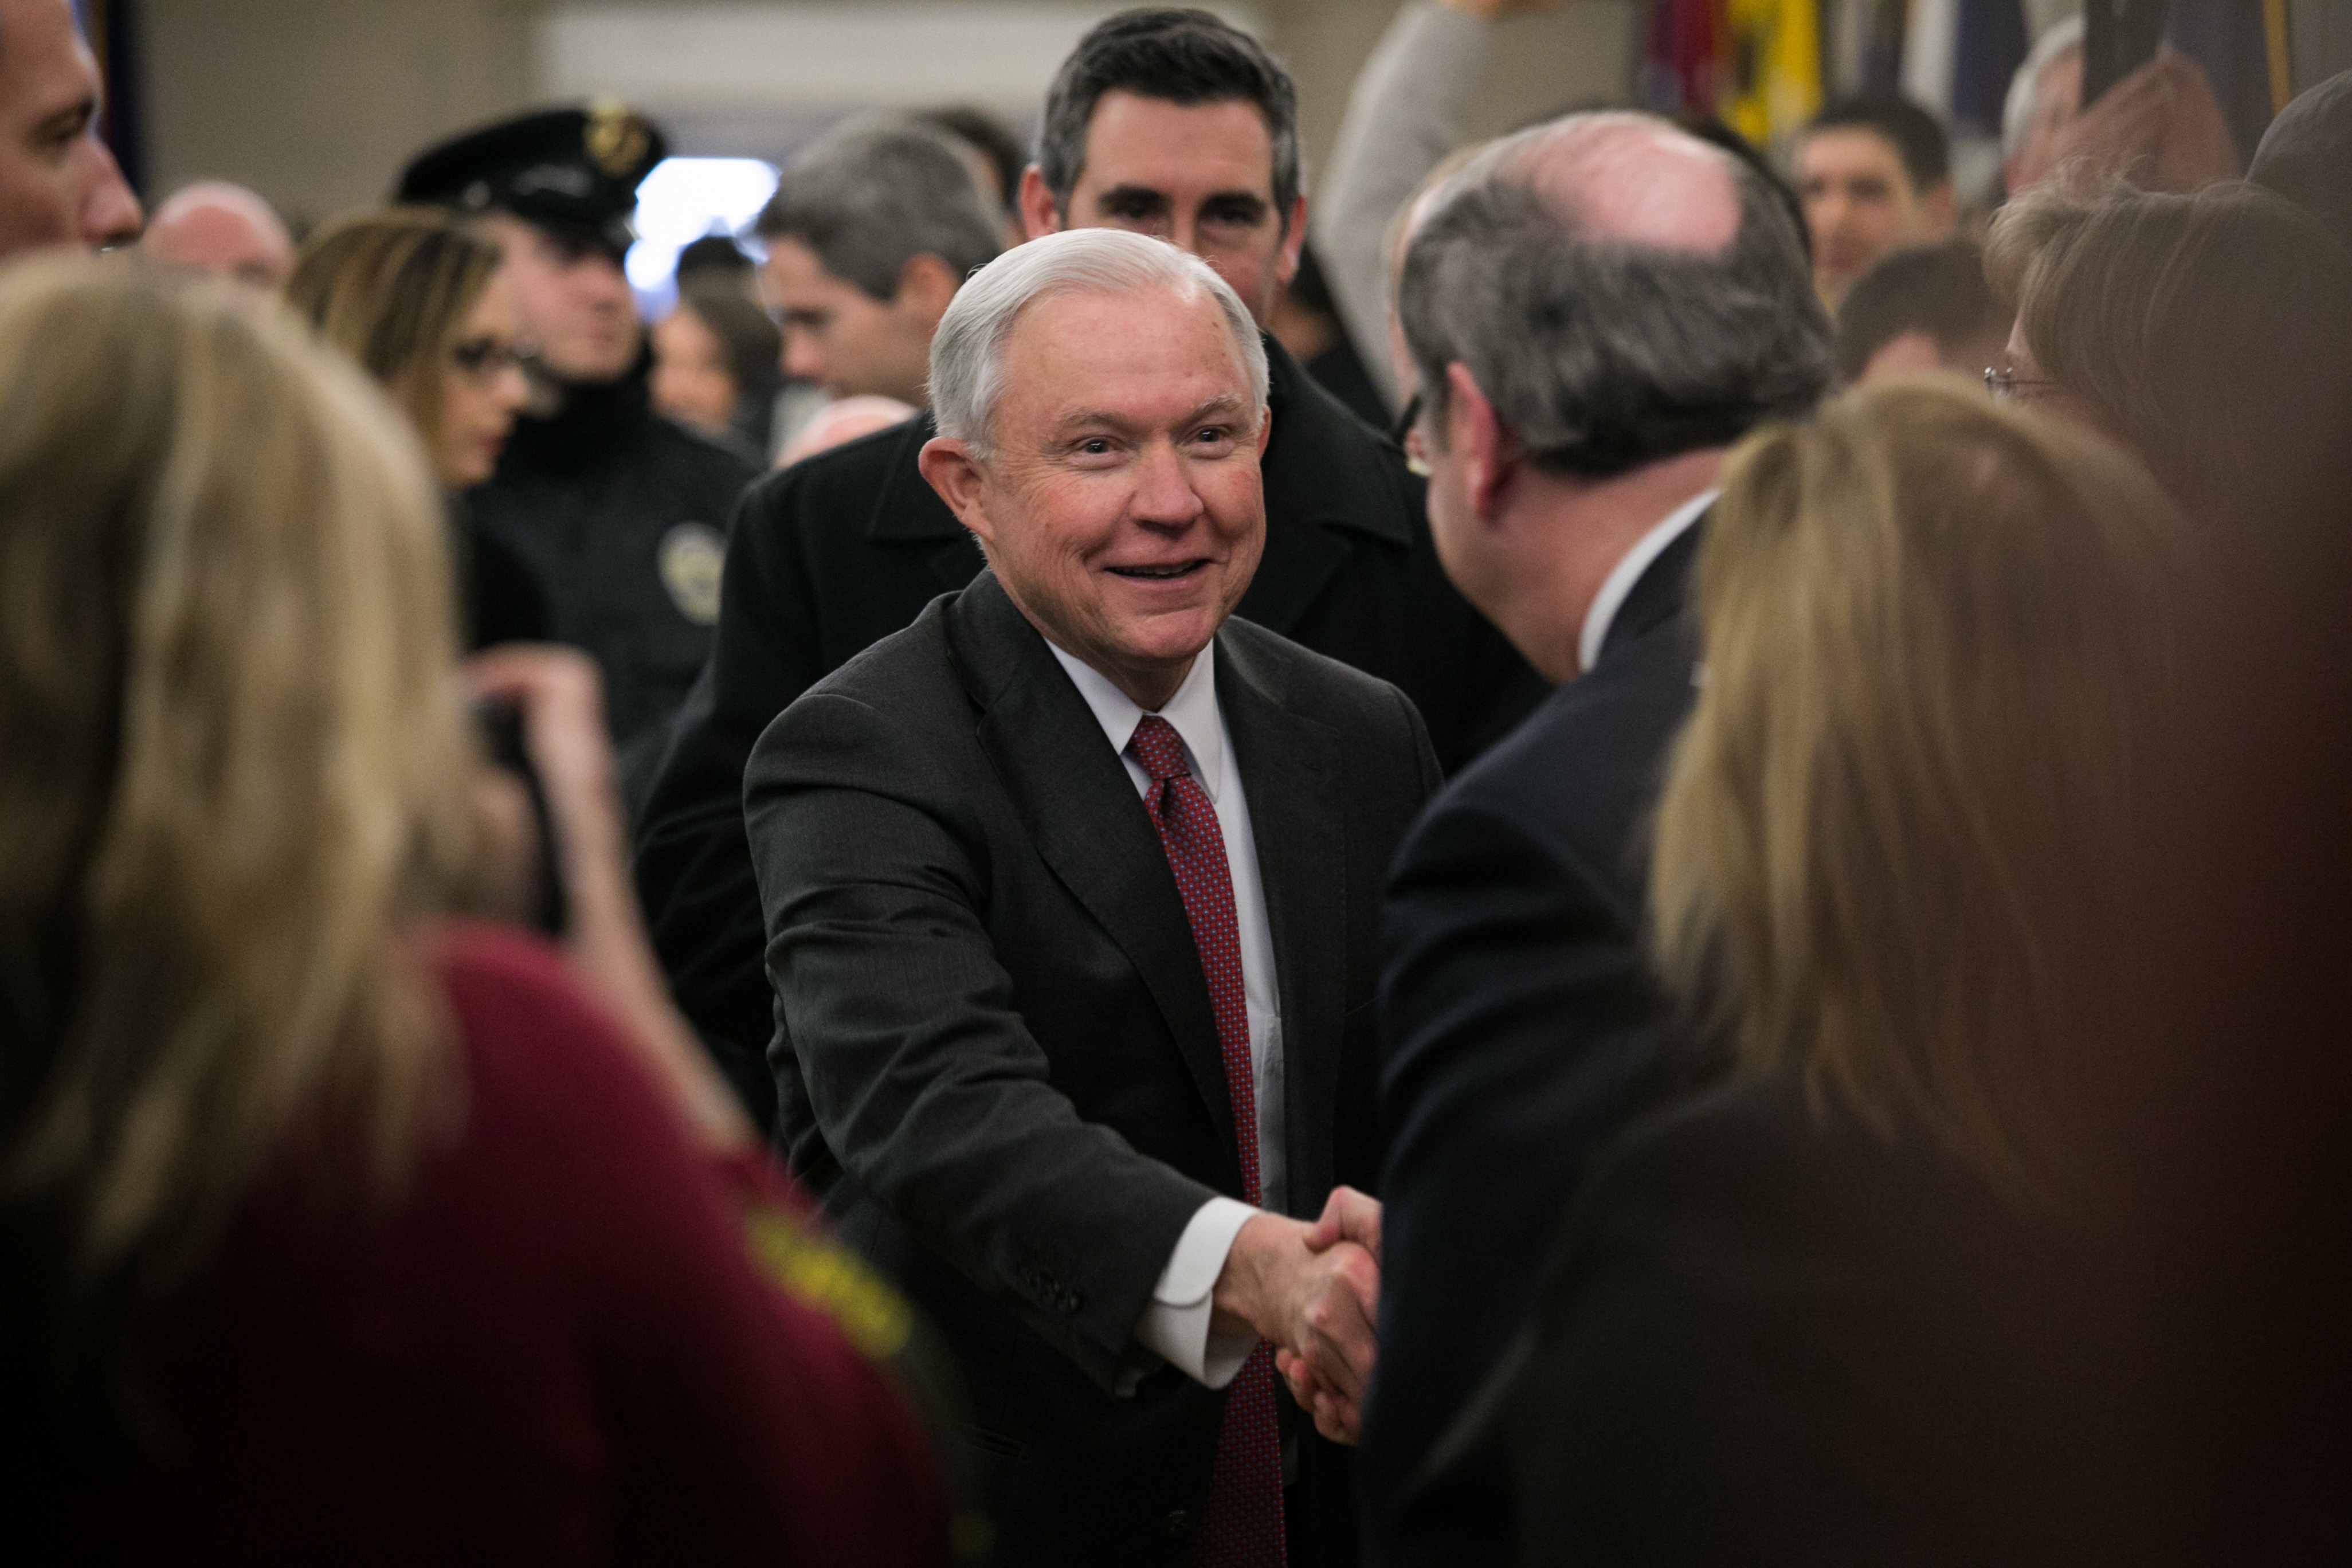 After taking his oath of office, Attorney General Sessions greets employees as he arrives at the Department of Justice.